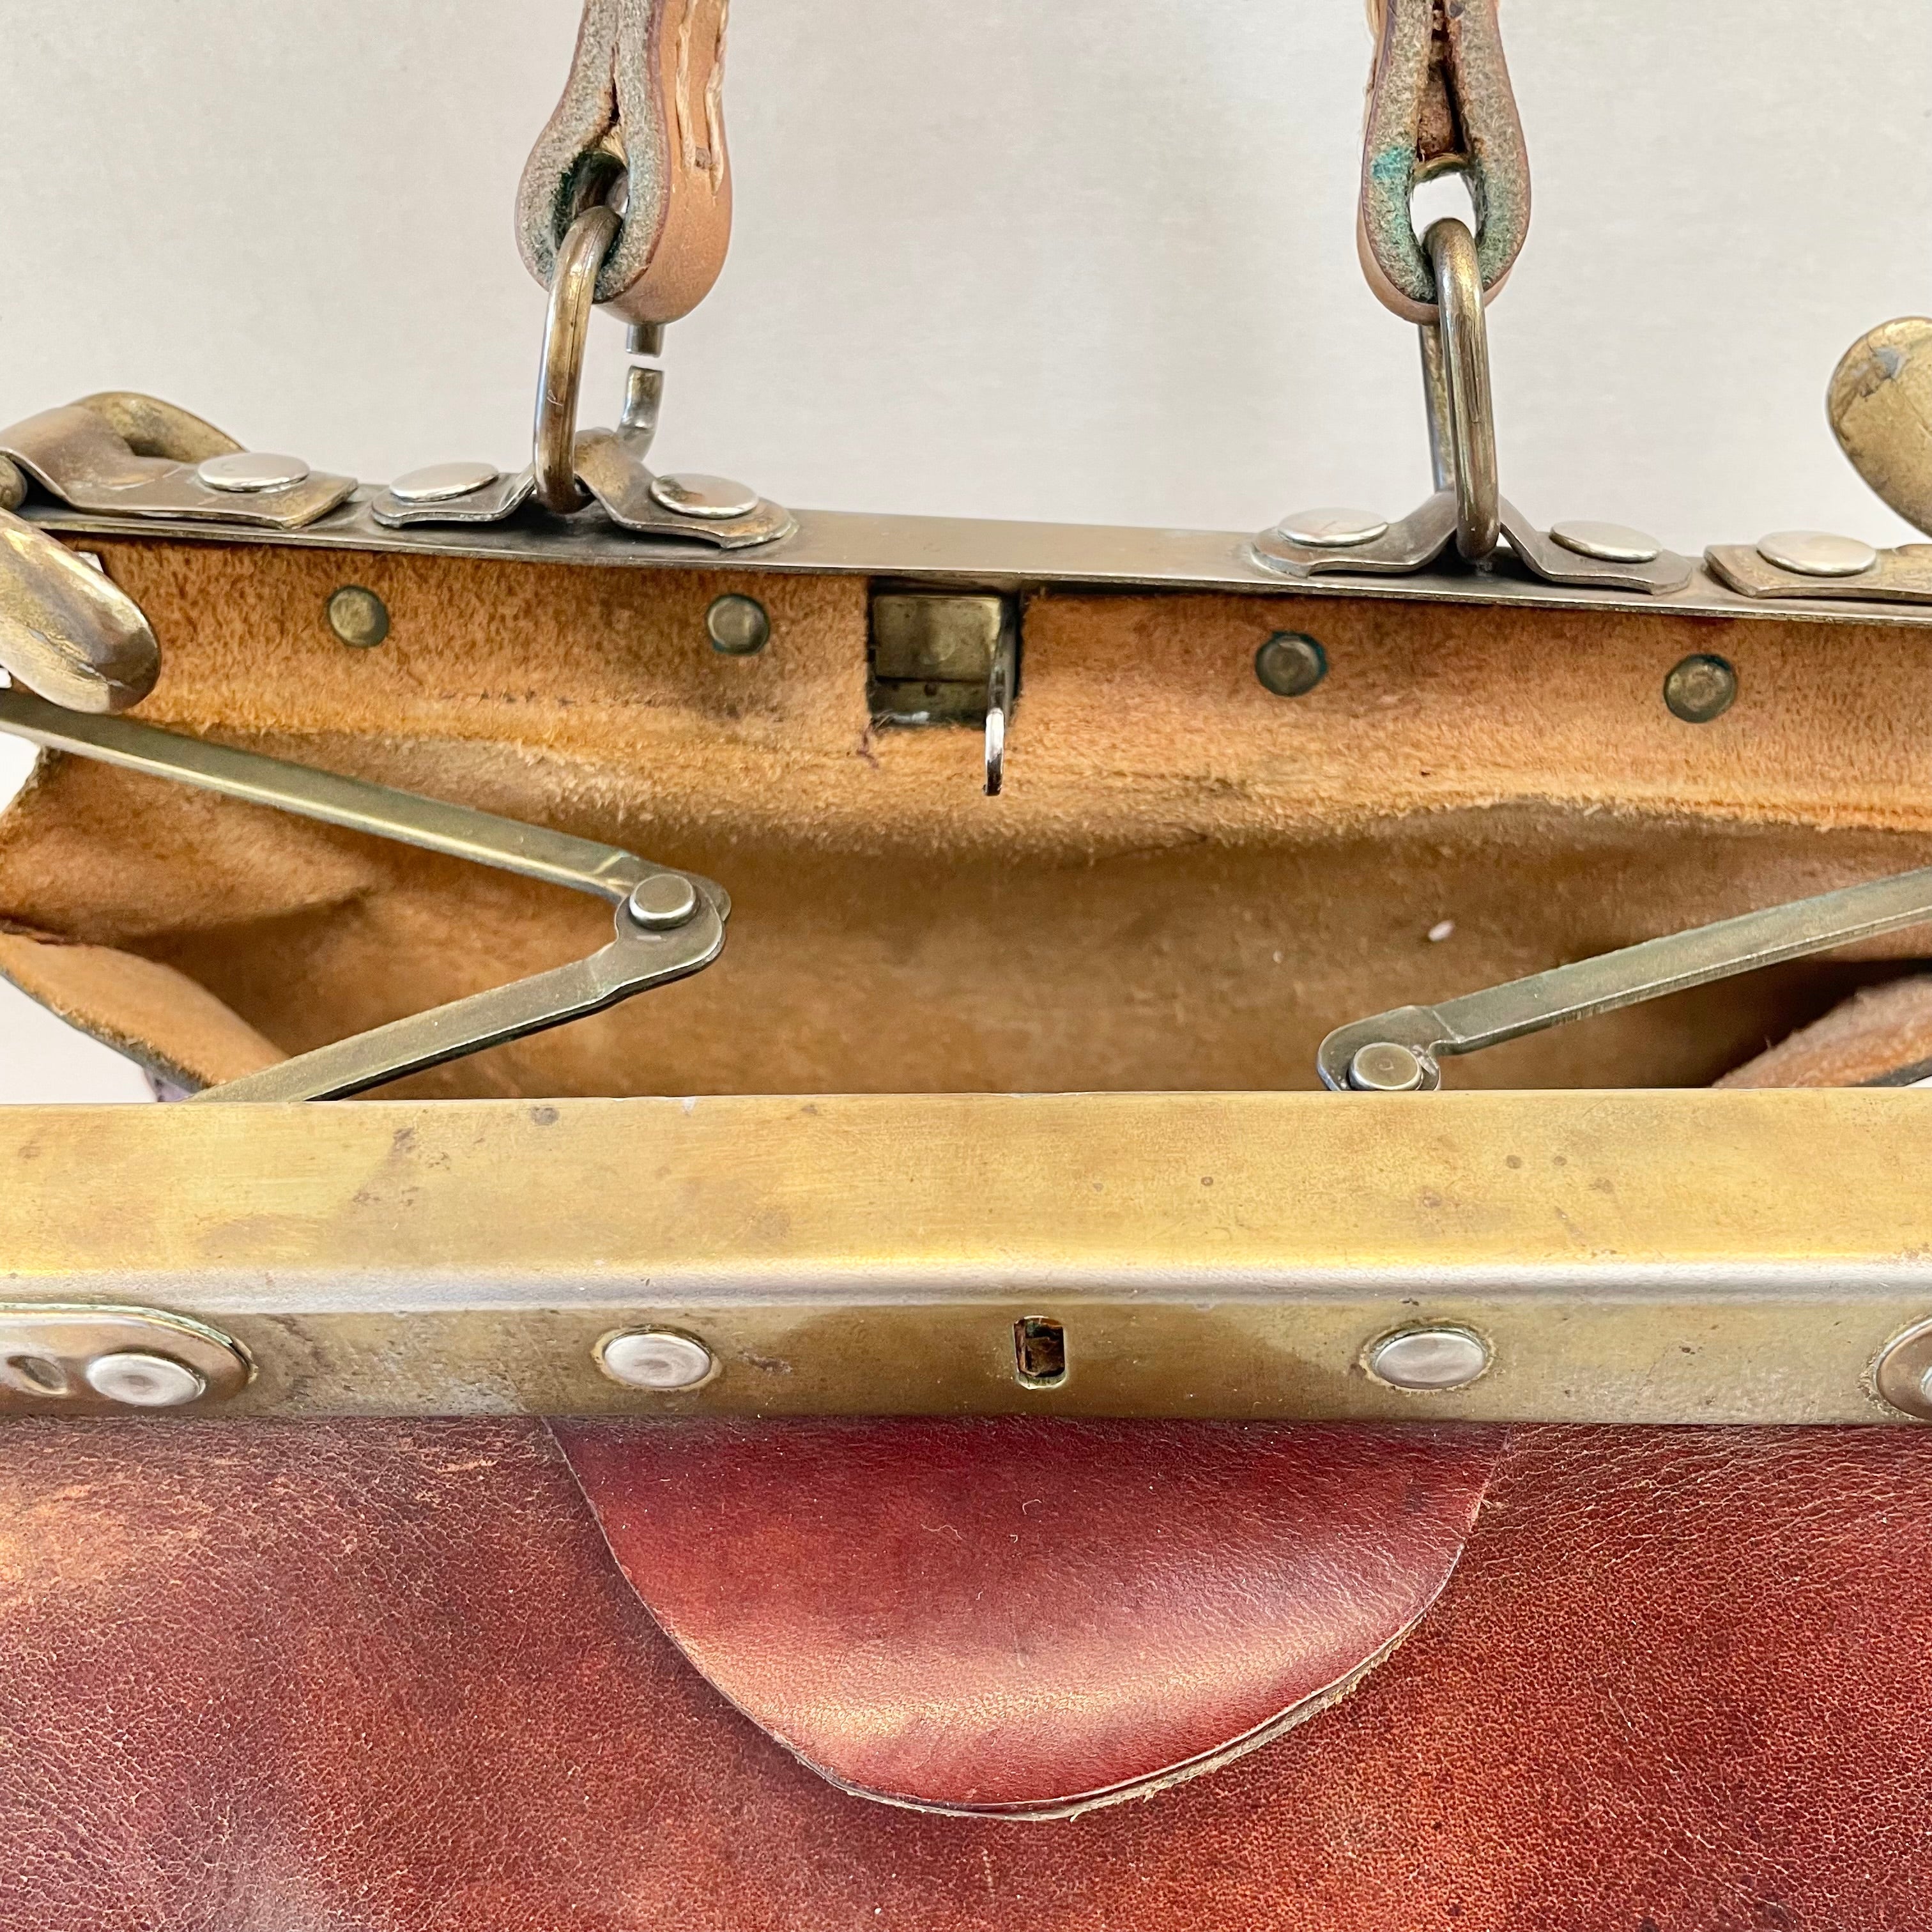 Upstaged Vintage on X: Vintage FRENCH Antique Leather Gladstone